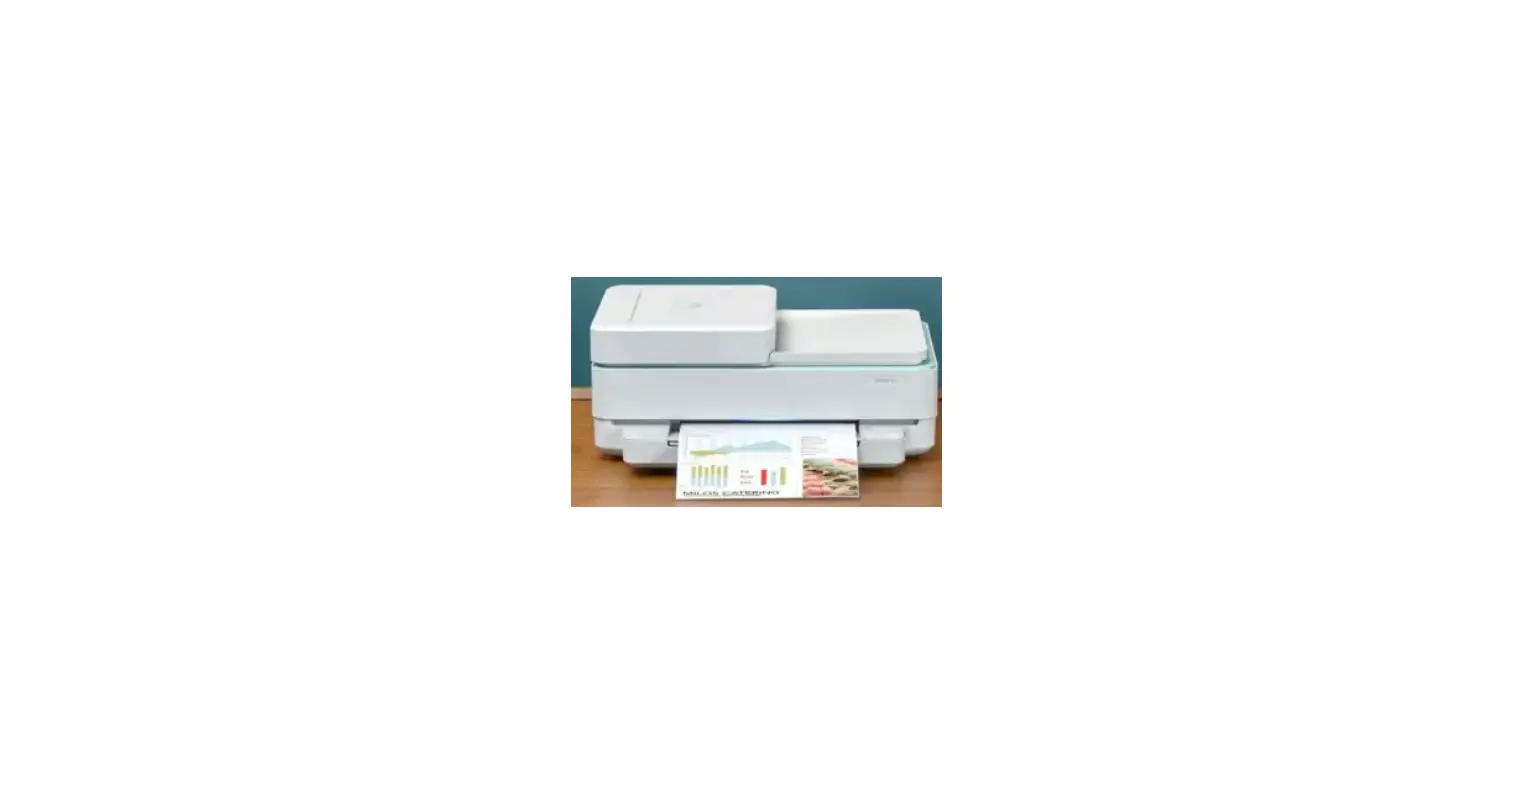 HP ENVY Pro All-in-One Photo Printer [6020, 6420, 5020 ....] Catalog